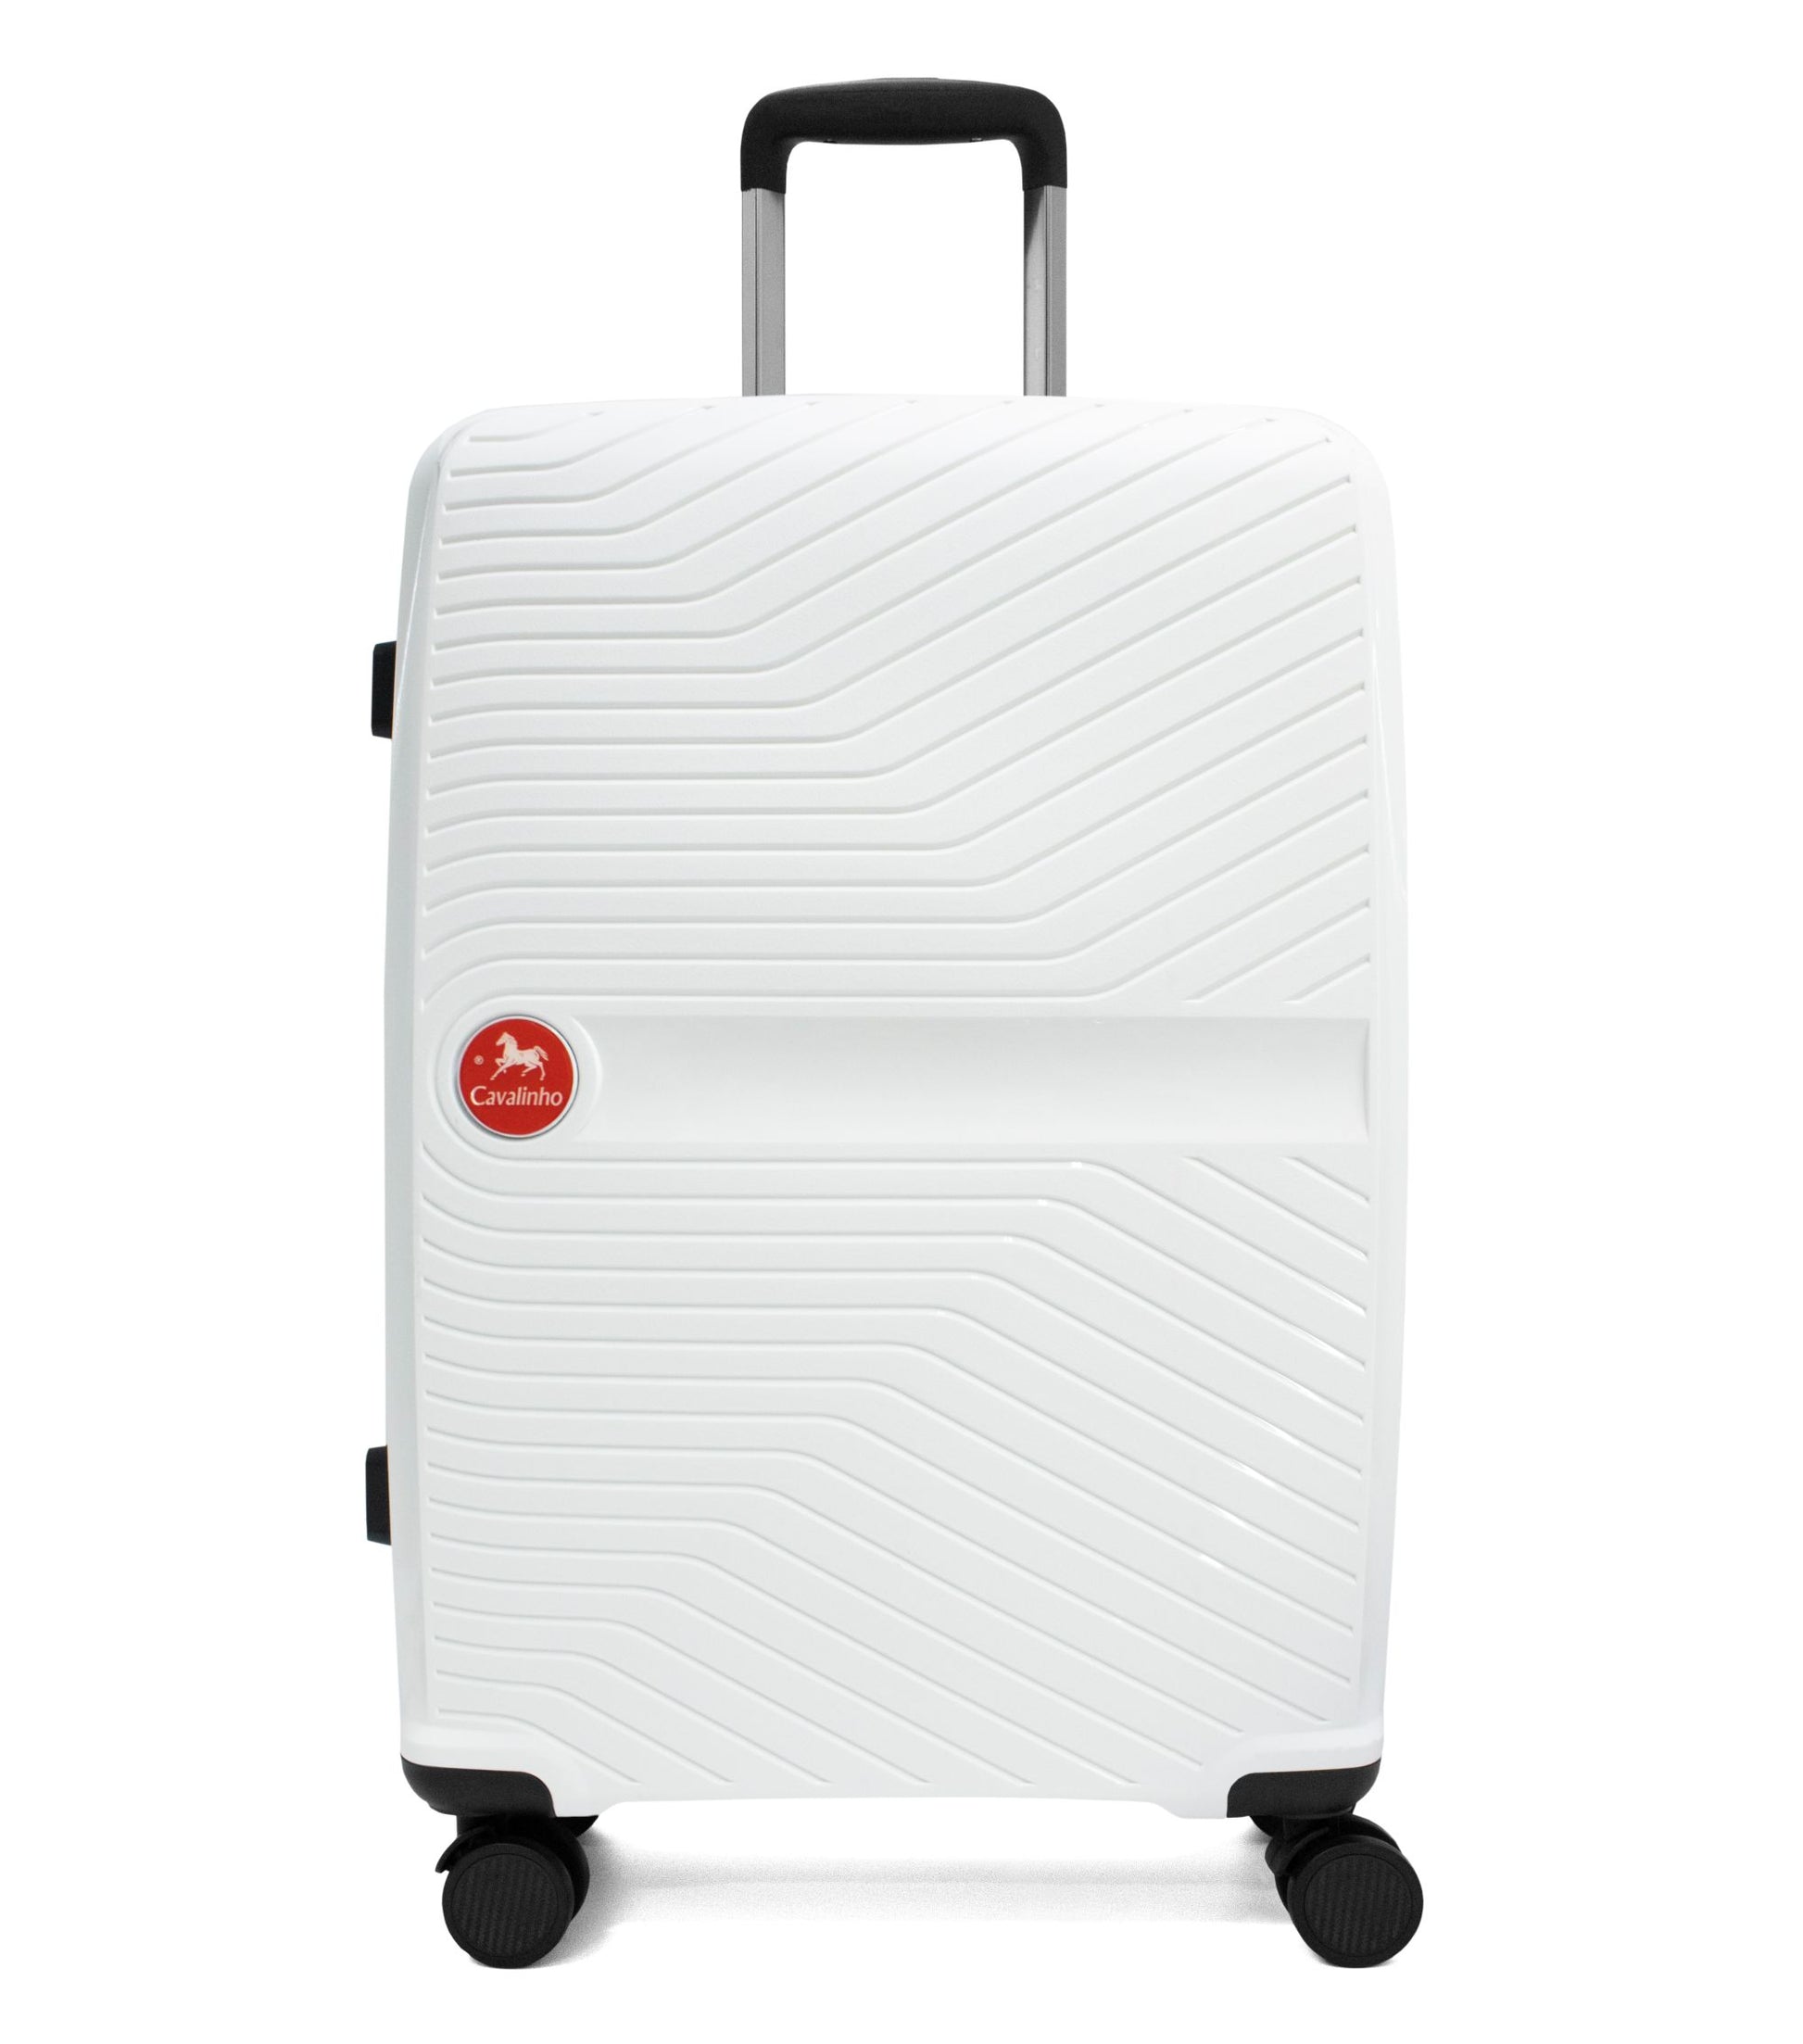 #color_ 24 inch White | Cavalinho Colorful Check-in Hardside Luggage (24") - 24 inch White - 68020004.06.24_1